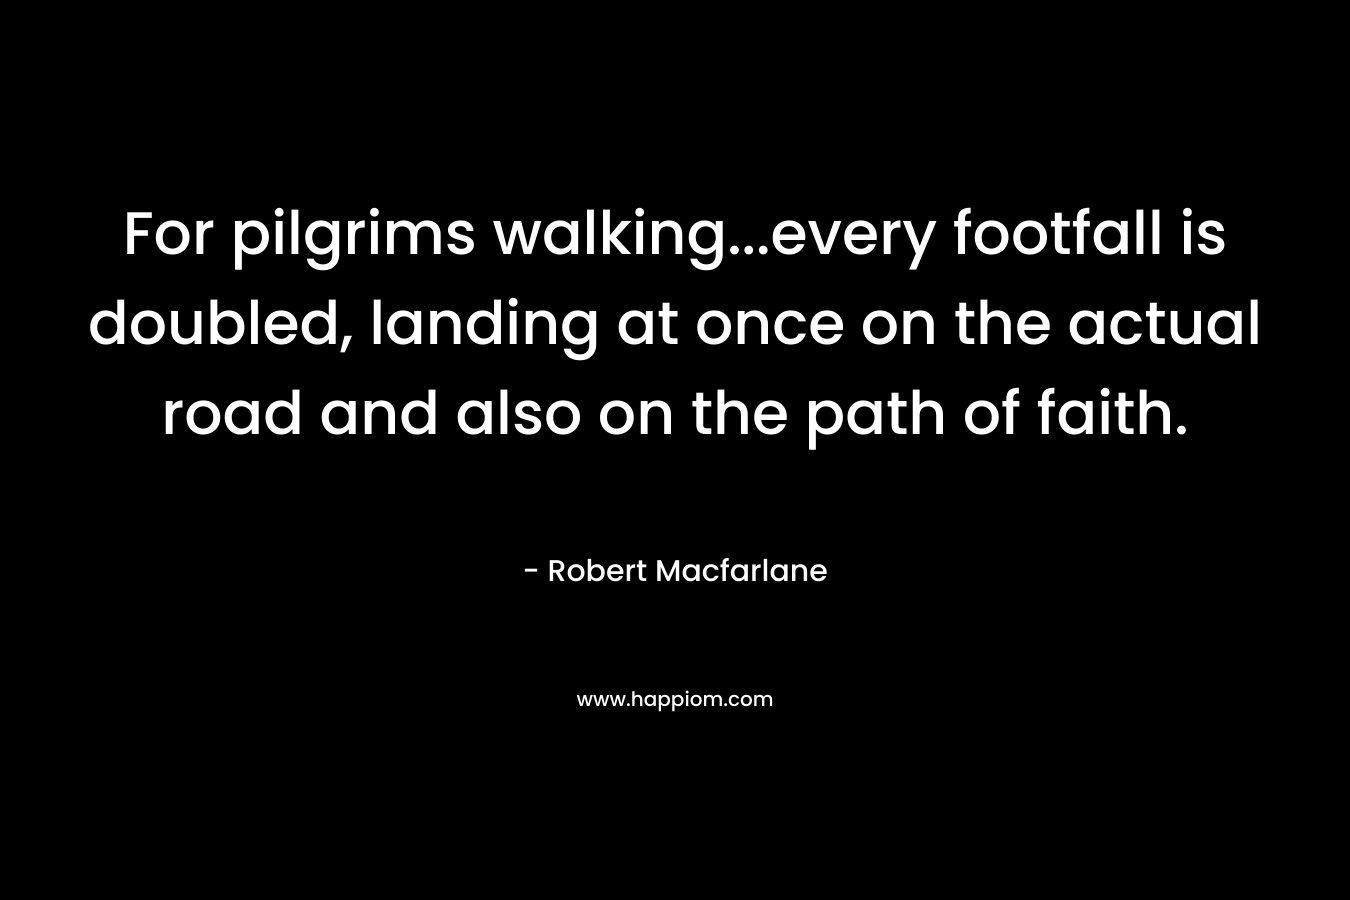 For pilgrims walking…every footfall is doubled, landing at once on the actual road and also on the path of faith. – Robert Macfarlane